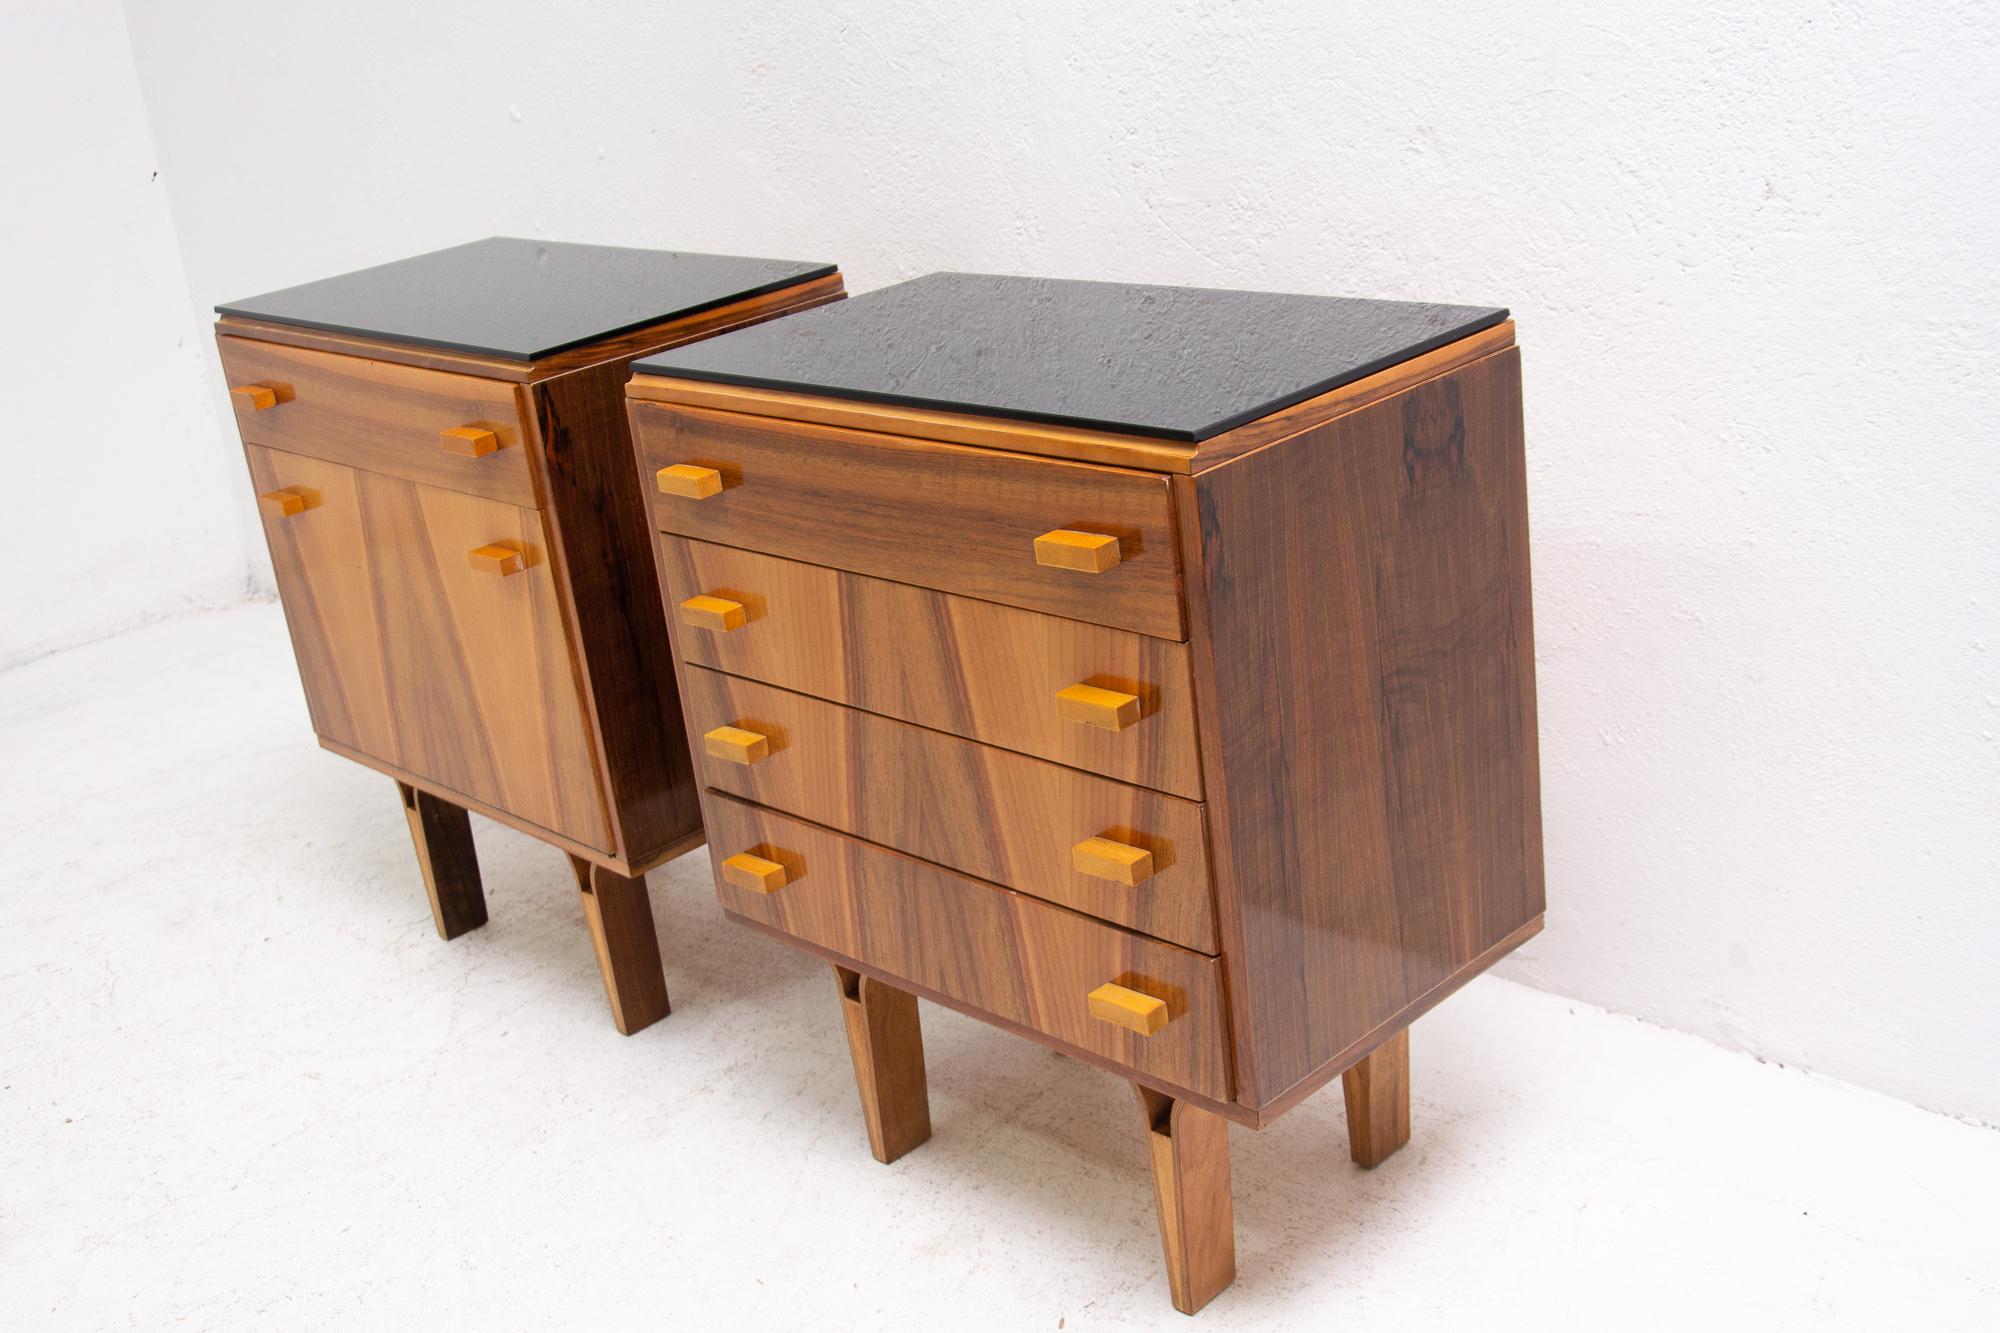 20th Century Midcentury Nightstands, Chest of Drawers by Nový Domov, 1970s, Czechoslovakia